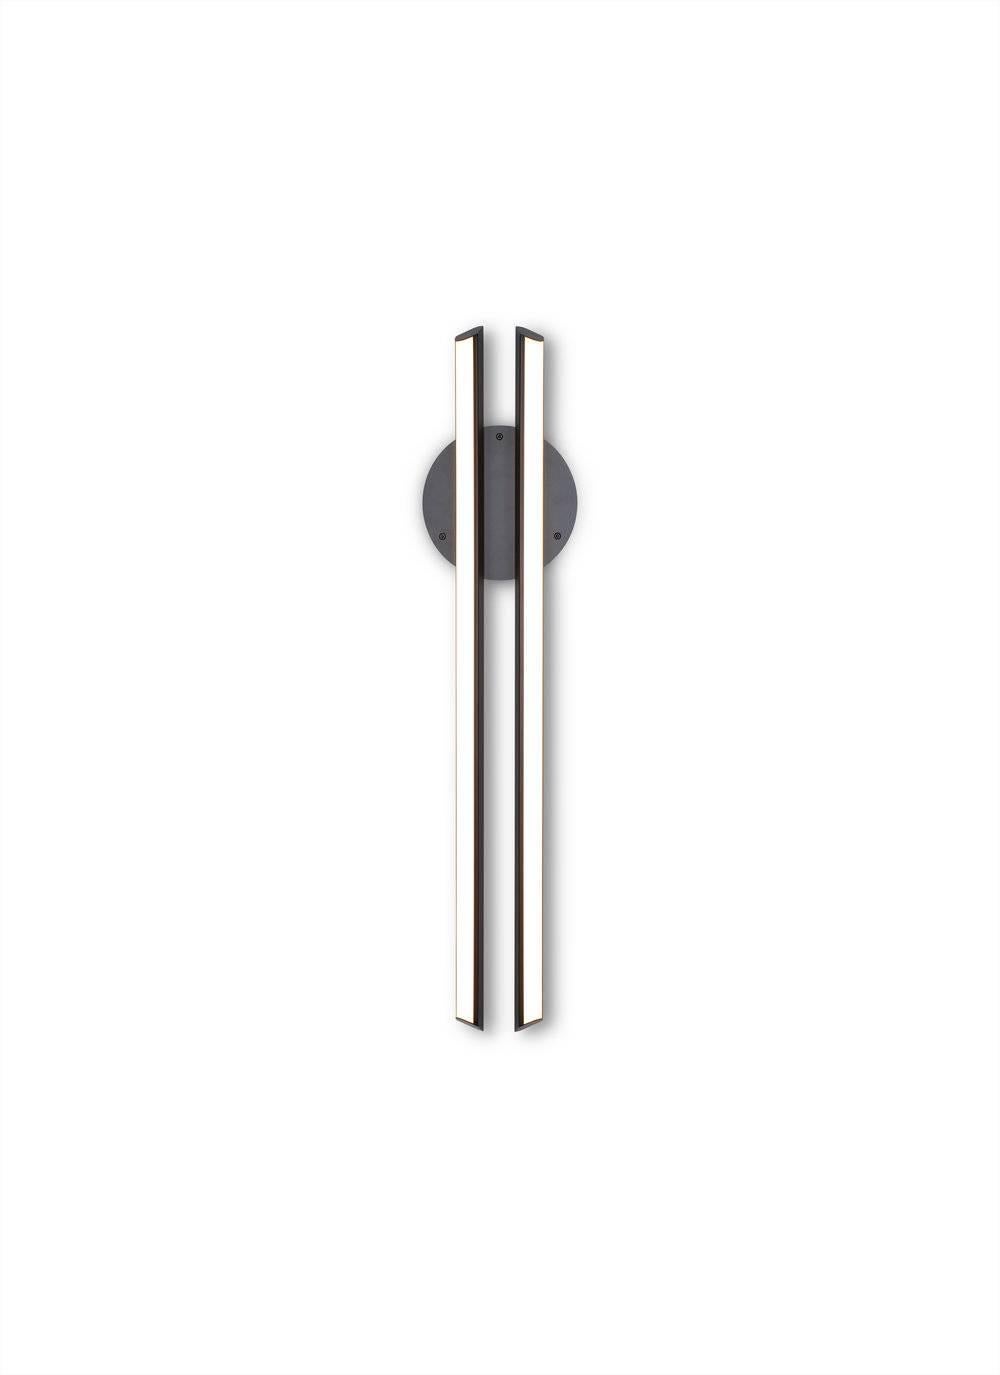 CHIME 35 sconce is inspired by the harmonious sound of resonating bells. CHIME 35 features two parallel bars of soft warm light floating over a disc backplate. Available in two sizes, perfect for a hallway or vanity.

Metal finish
Powder-coat finish